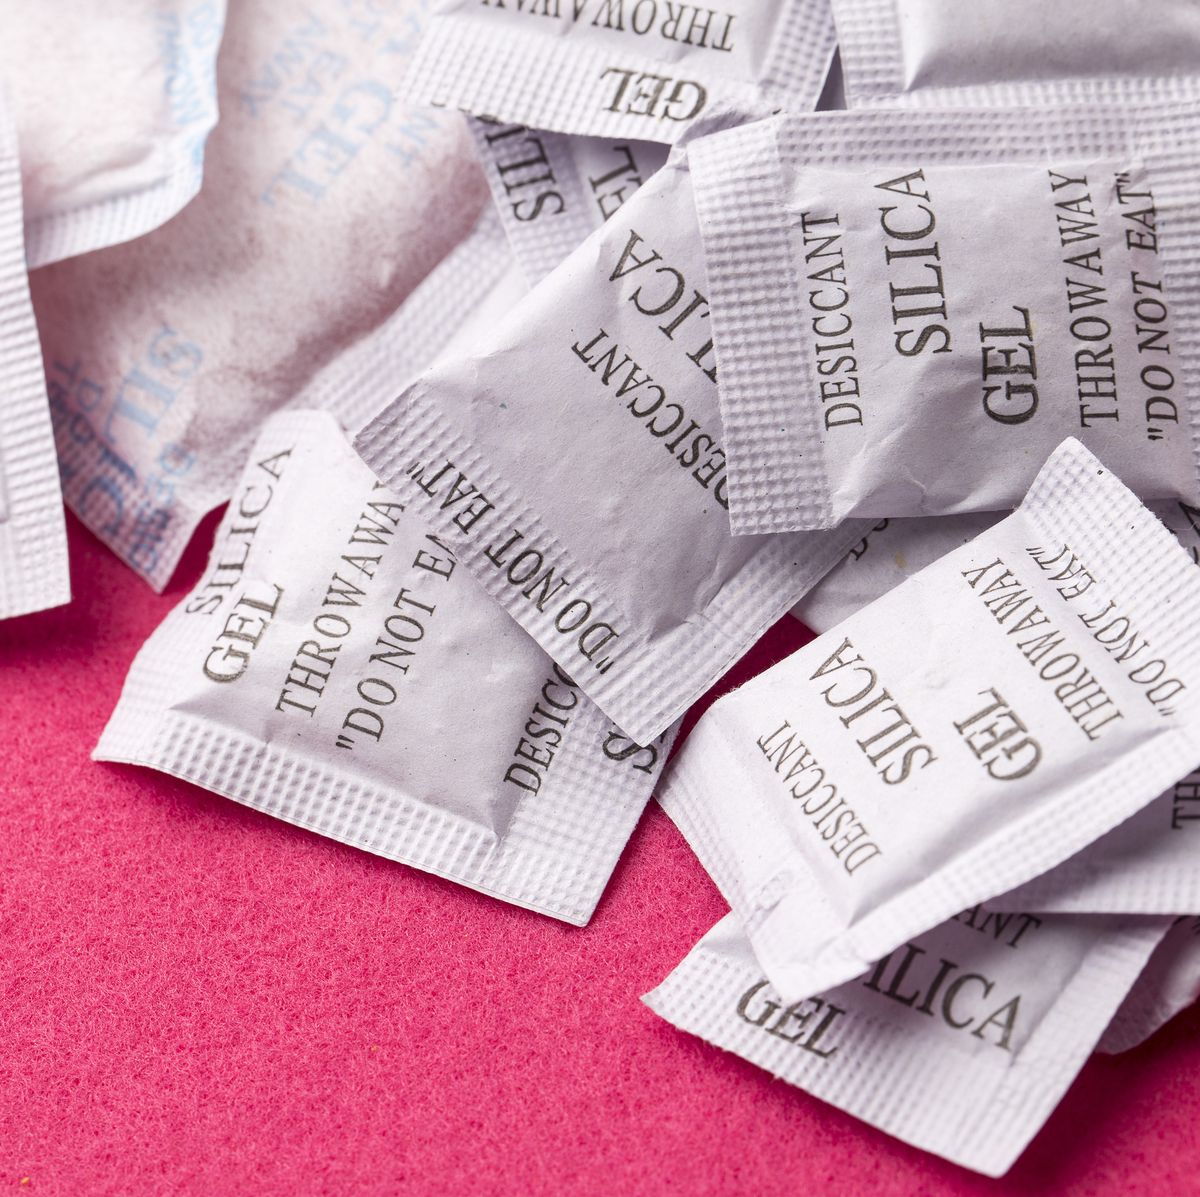 You should save those silica gel packets that come with your purchases.  Here's why